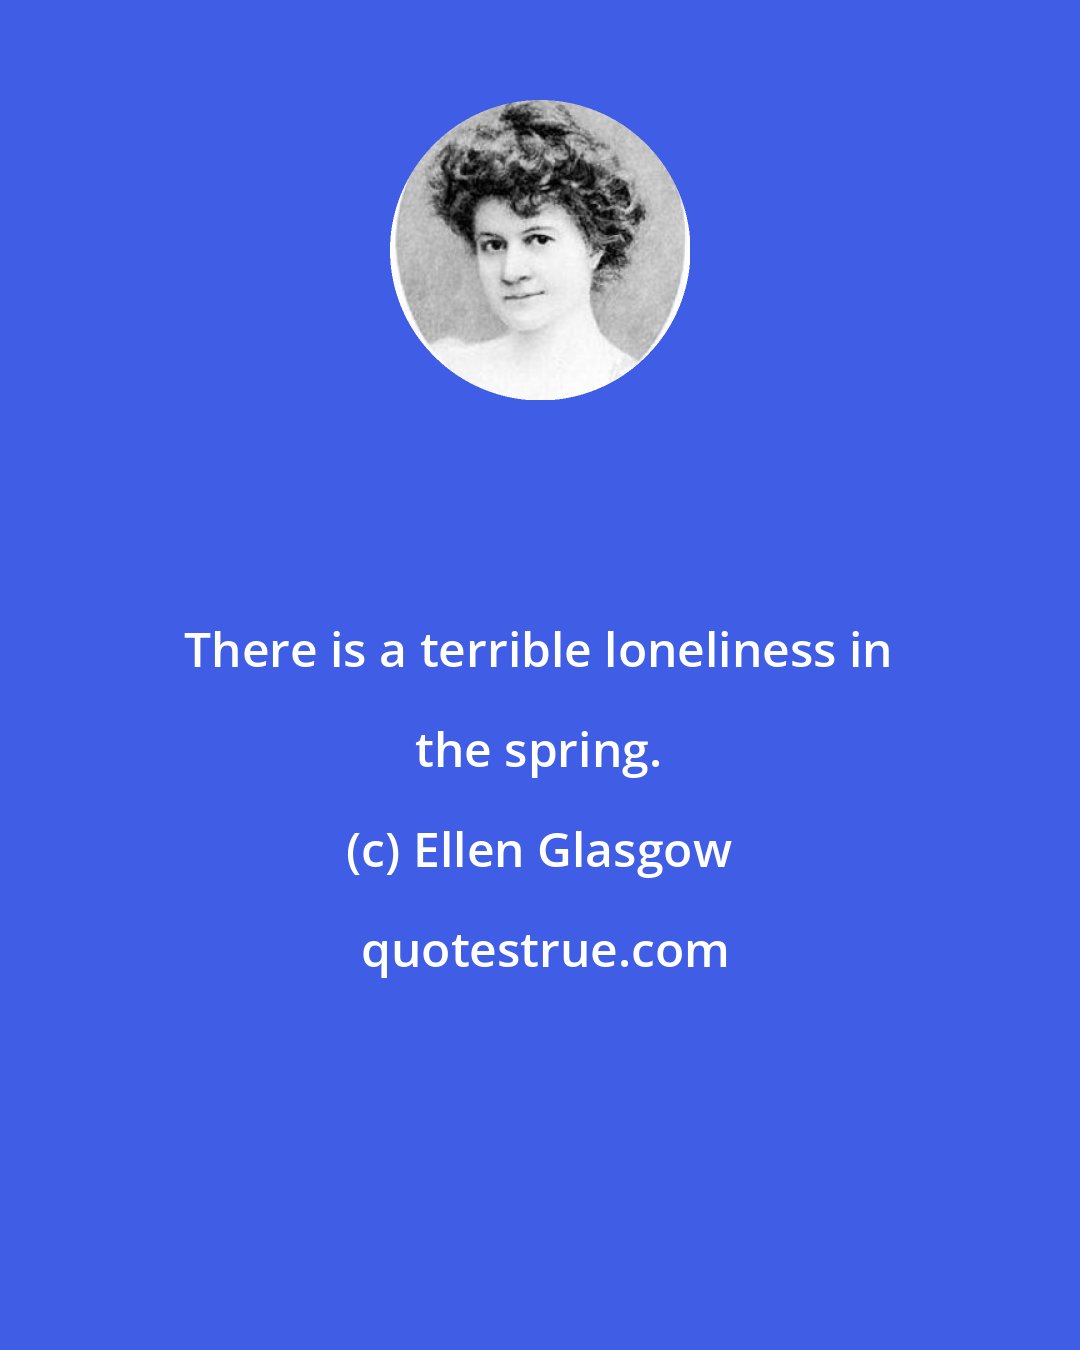 Ellen Glasgow: There is a terrible loneliness in the spring.